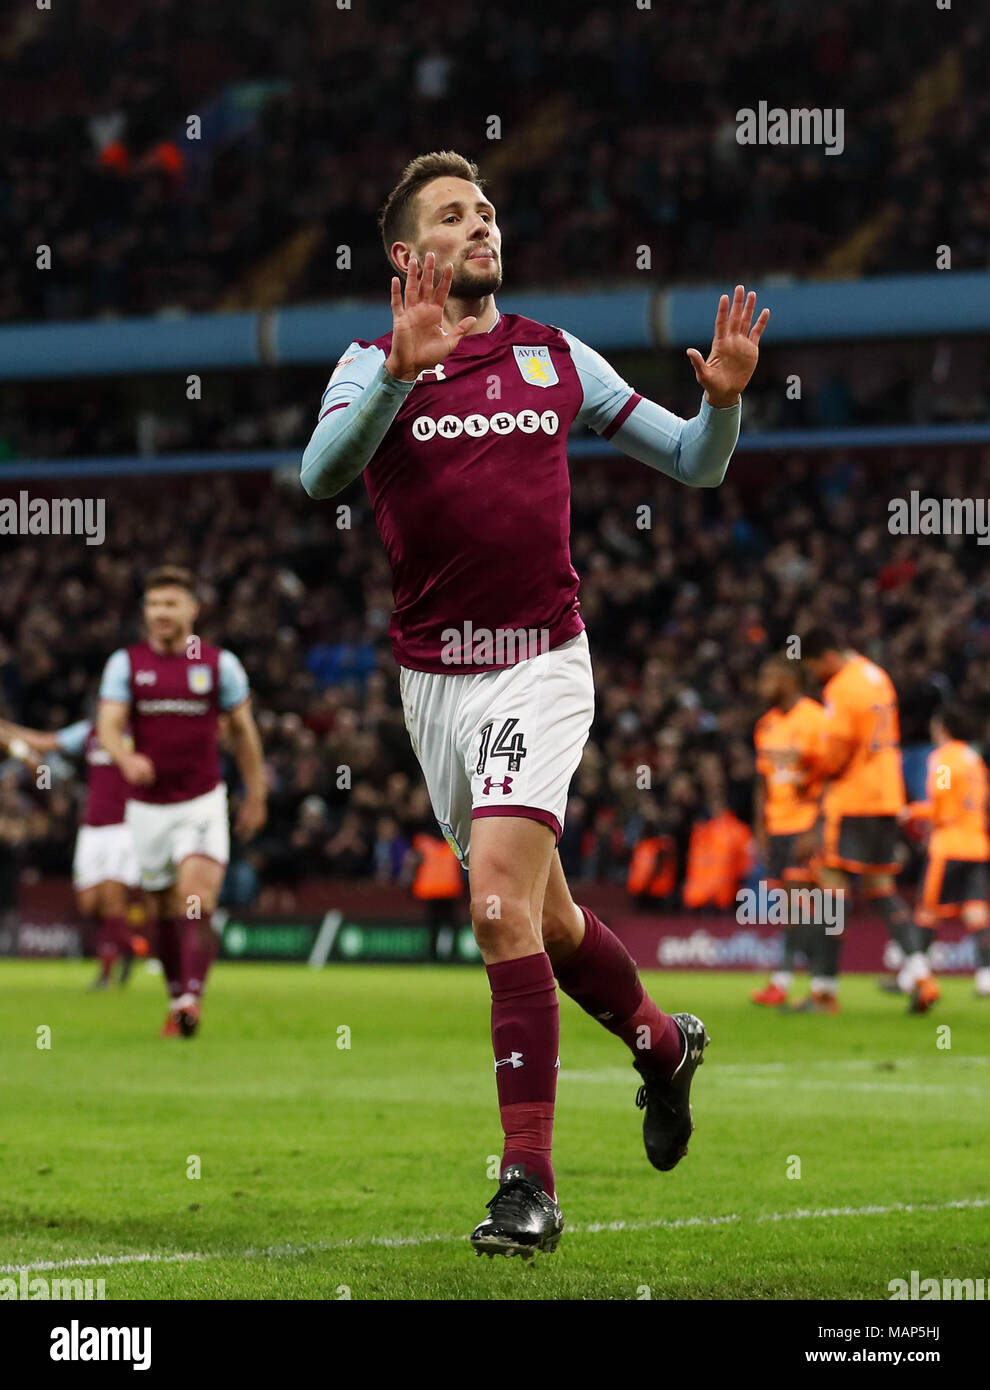 Aston Villa's Conor Hourihane celebrates scoring his side's second goal of the game during the Sky Bet Championship match at Villa Park, Birmingham. PRESS ASSOCIATION Photo. Picture date: Tuesday April 3, 2018. See PA story SOCCER Villa. Photo credit should read: Tim Goode/PA Wire. RESTRICTIONS: No use with unauthorised audio, video, data, fixture lists, club/league logos or 'live' services. Online in-match use limited to 75 images, no video emulation. No use in betting, games or single club/league/player publications. Stock Photo